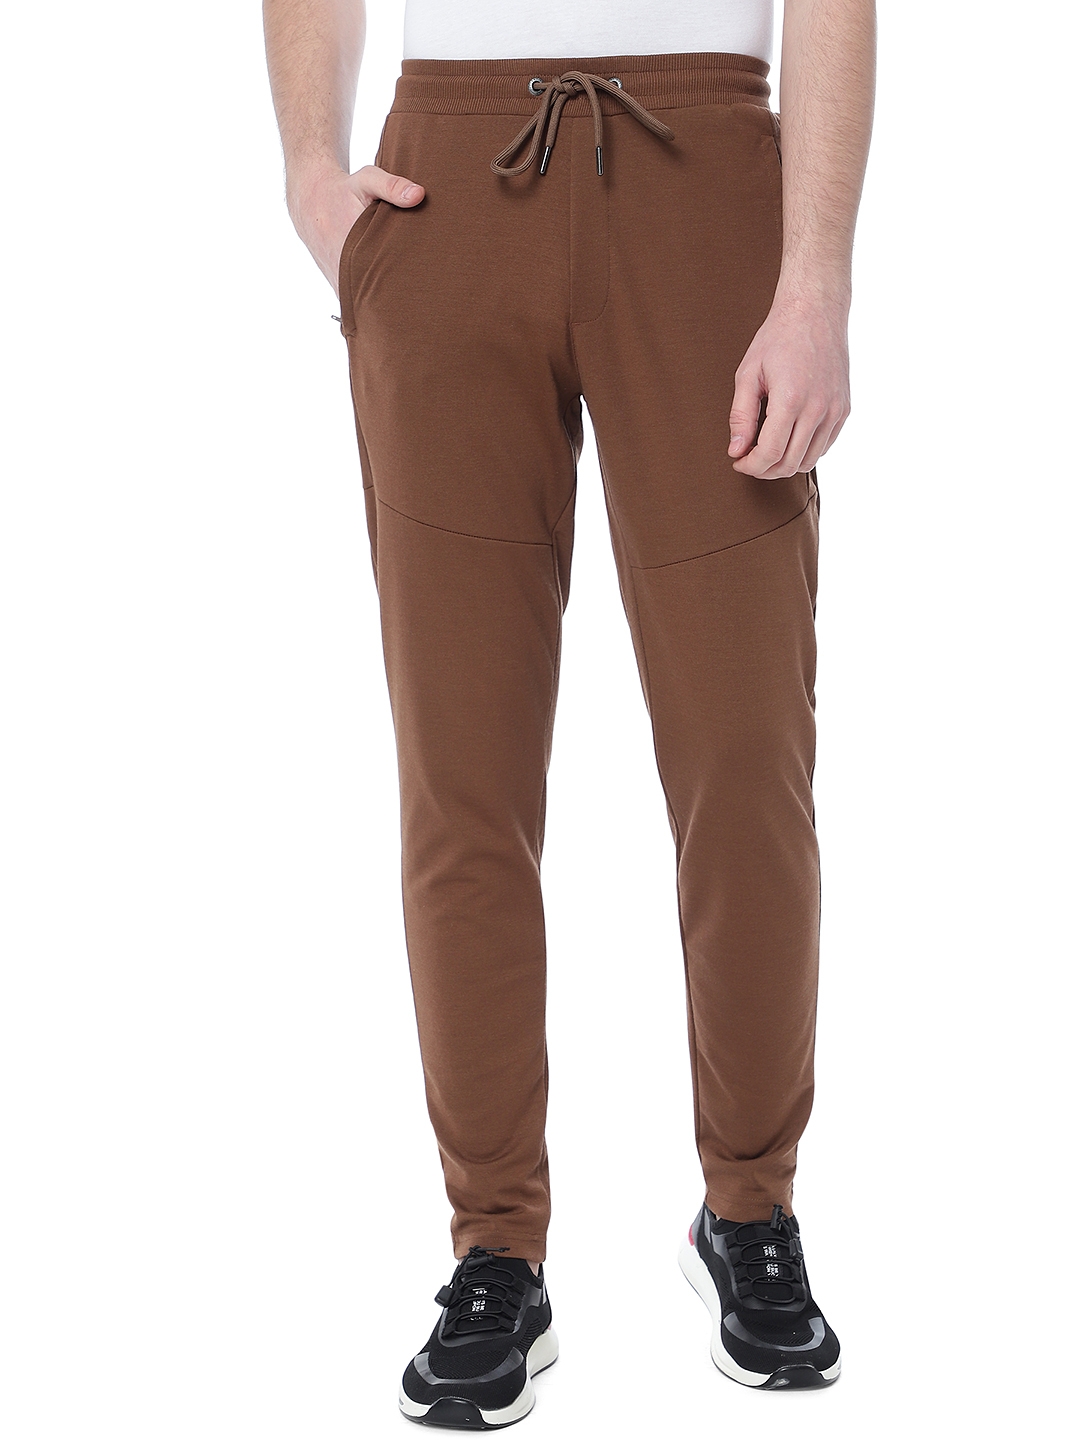 Greenfibre | Coffee Brown Solid Slim Fit Track Pant | Greenfibre 0